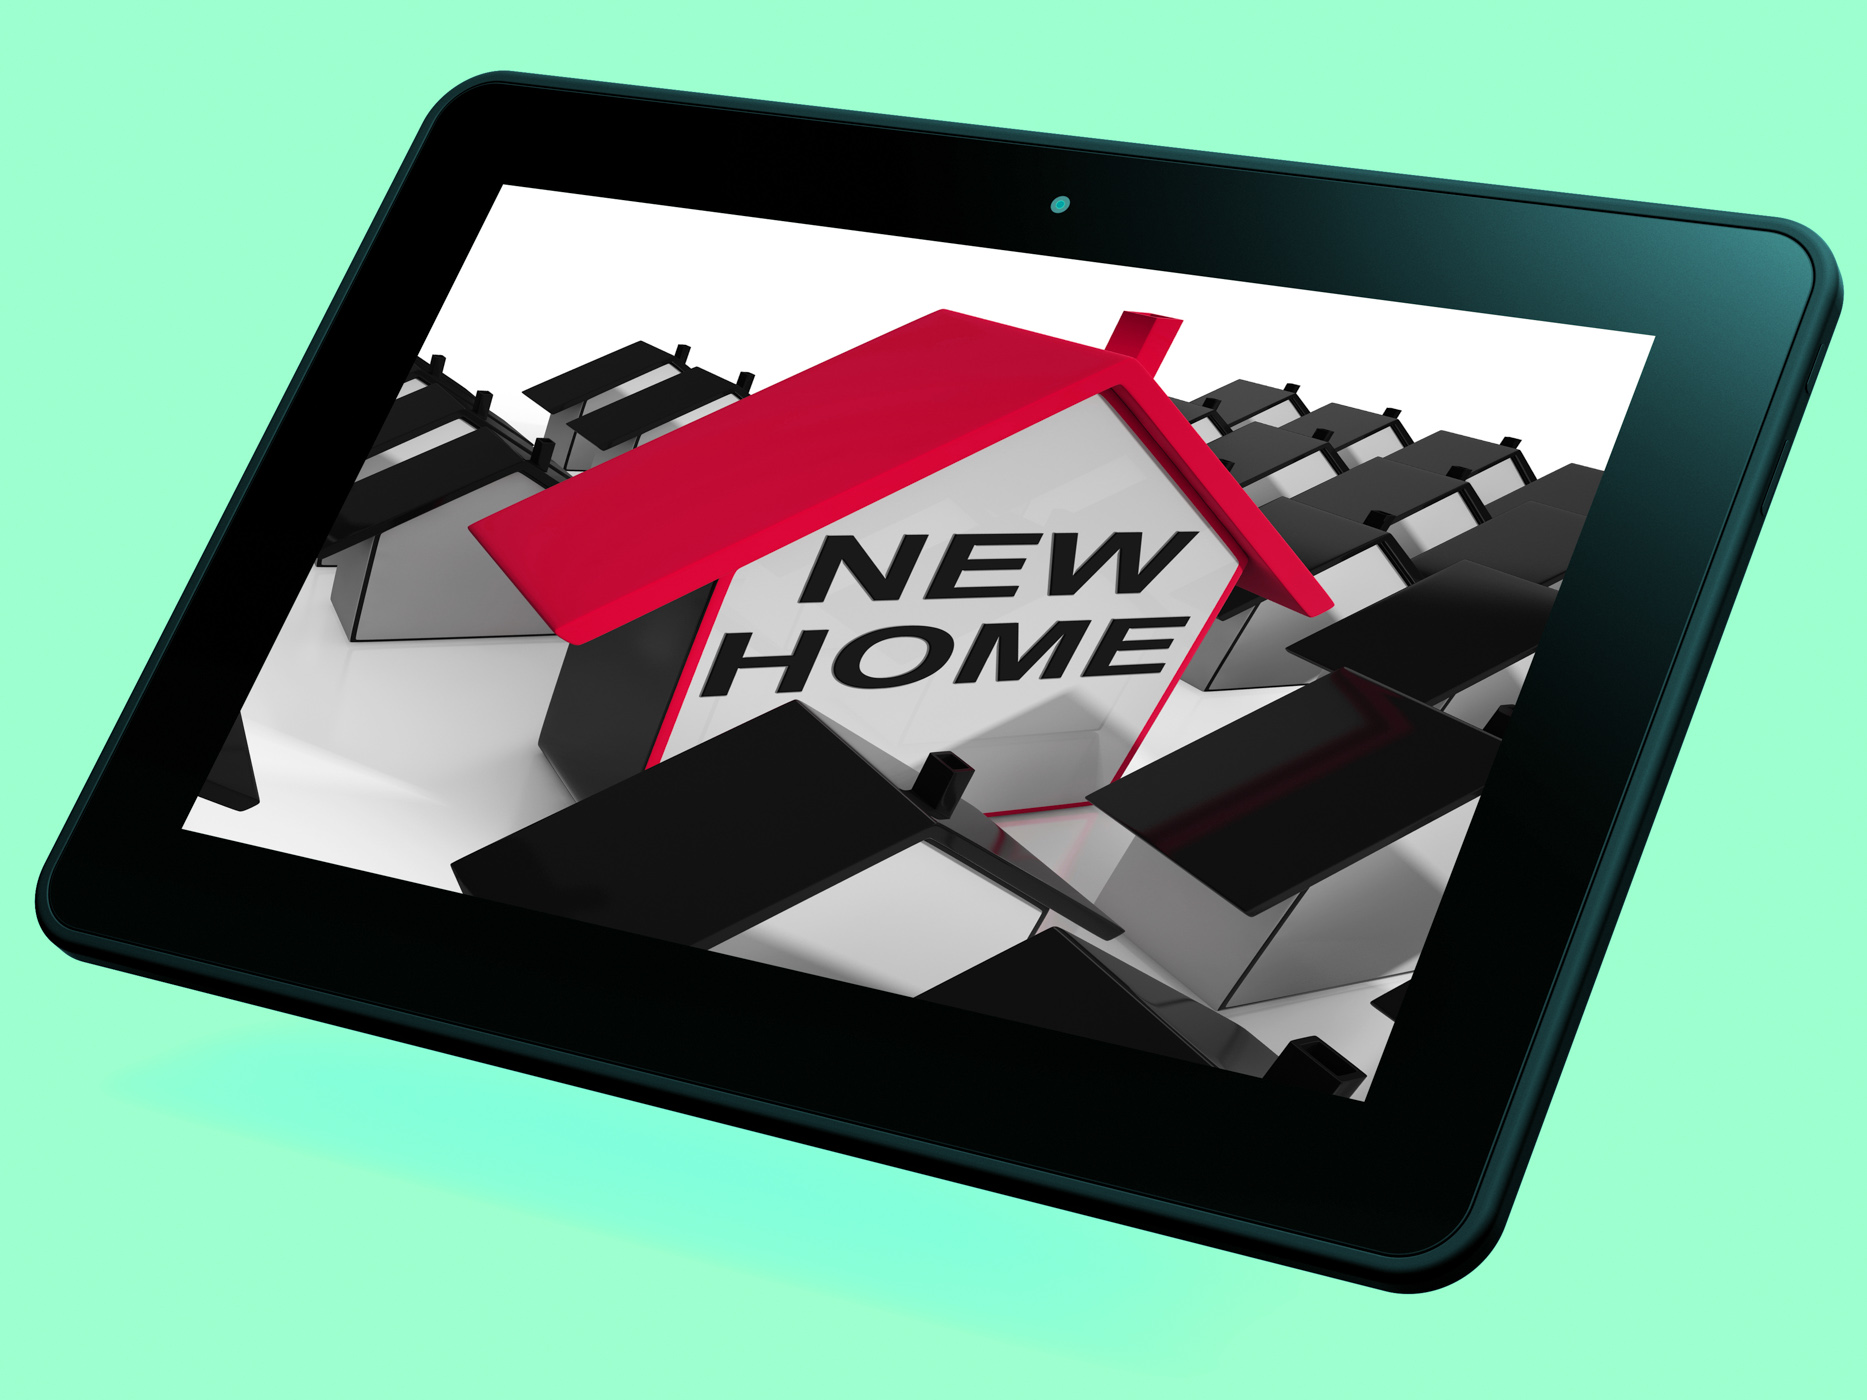 New home house tablet means buying property or real estate photo